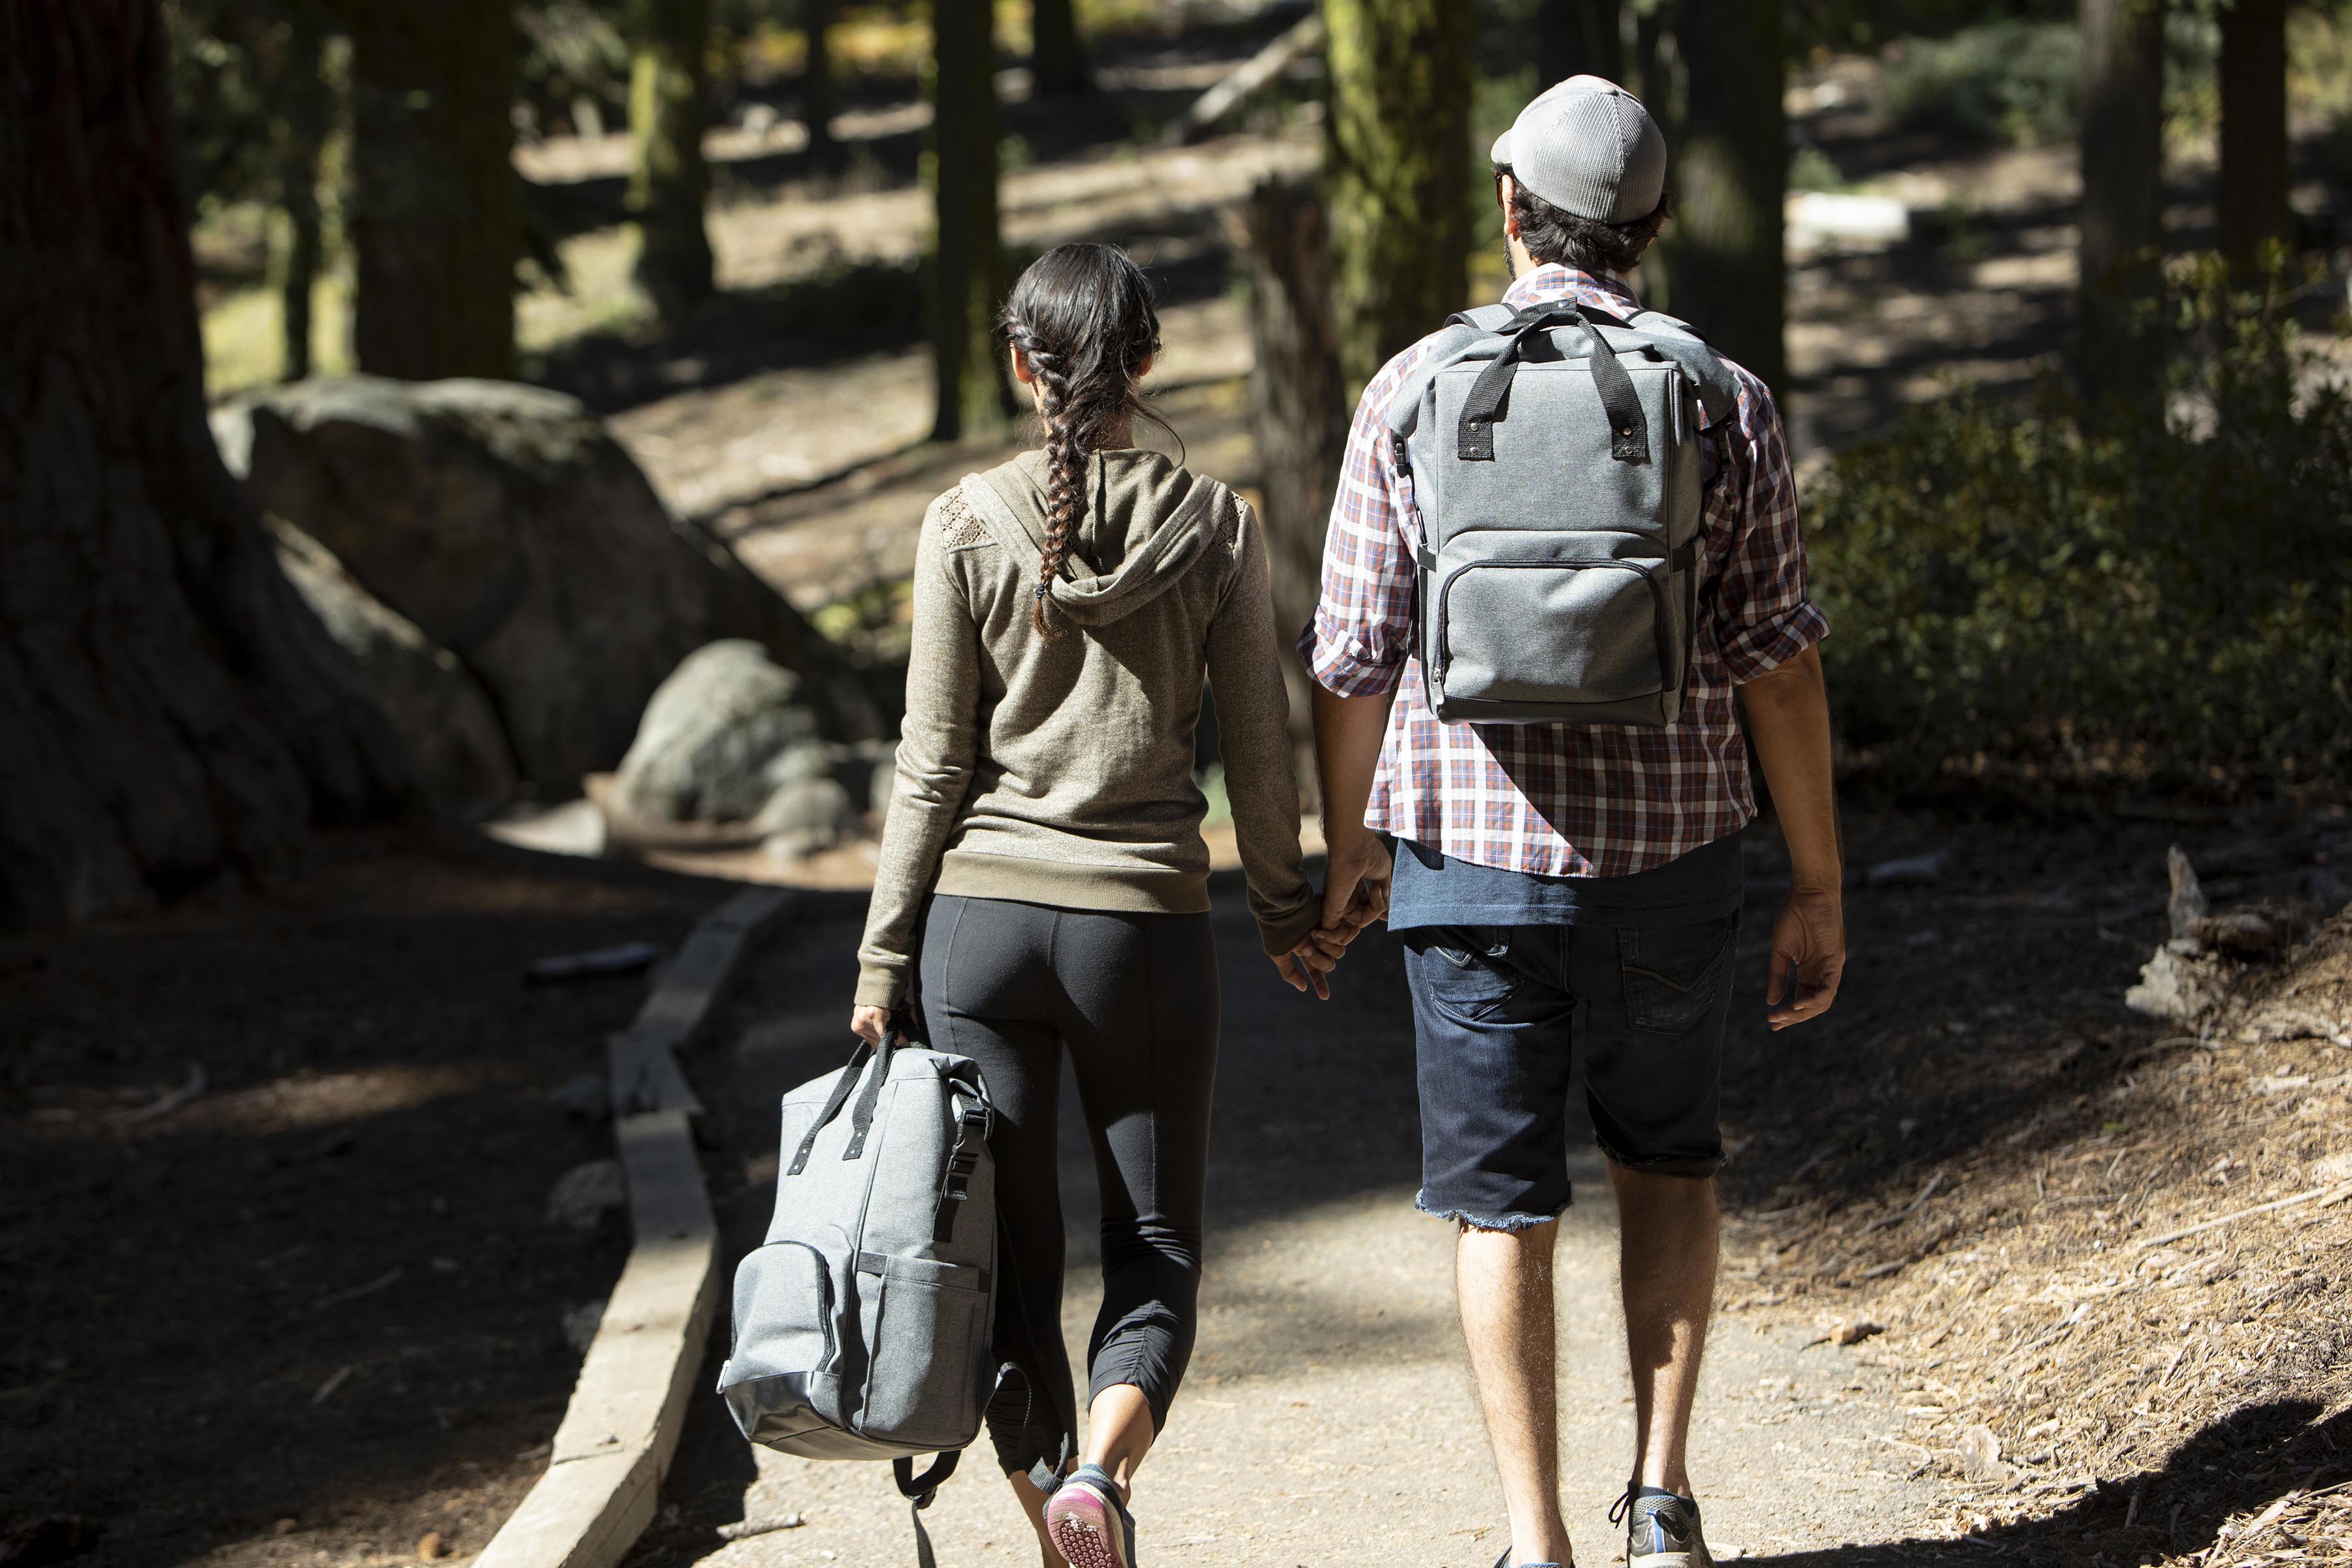 On The Go Roll-Top Cooler Backpack